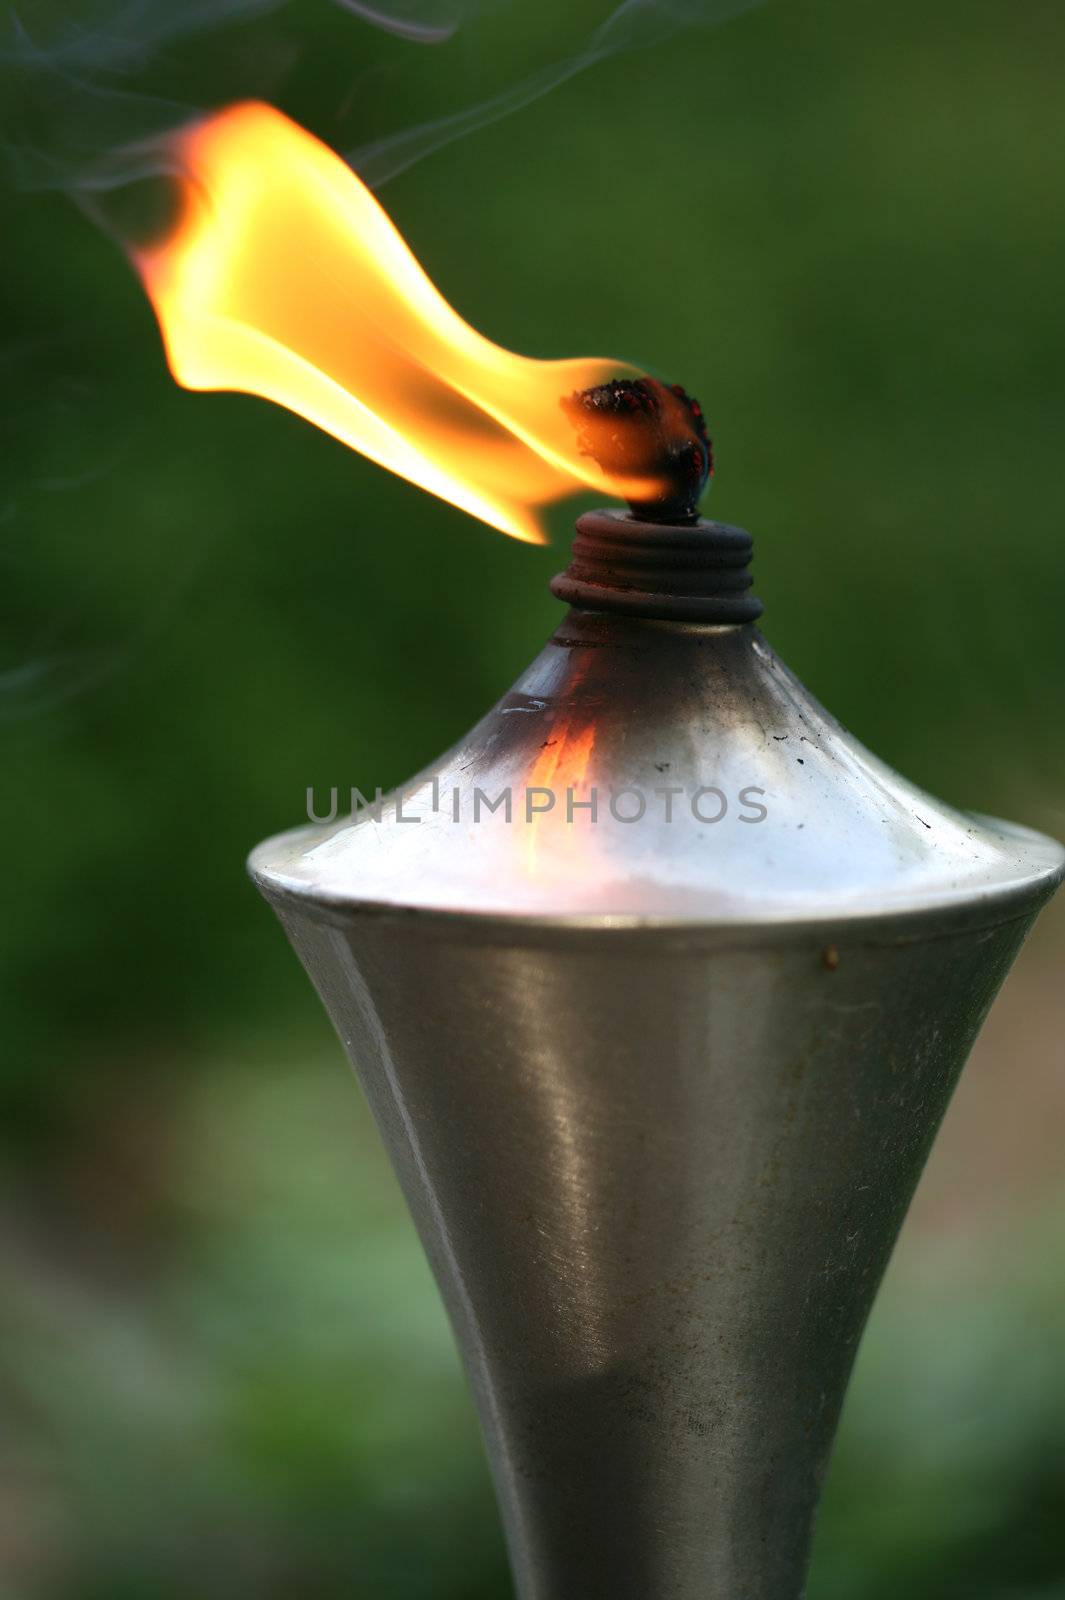 Lit torch with orange flame in garden used as mosquito repellent